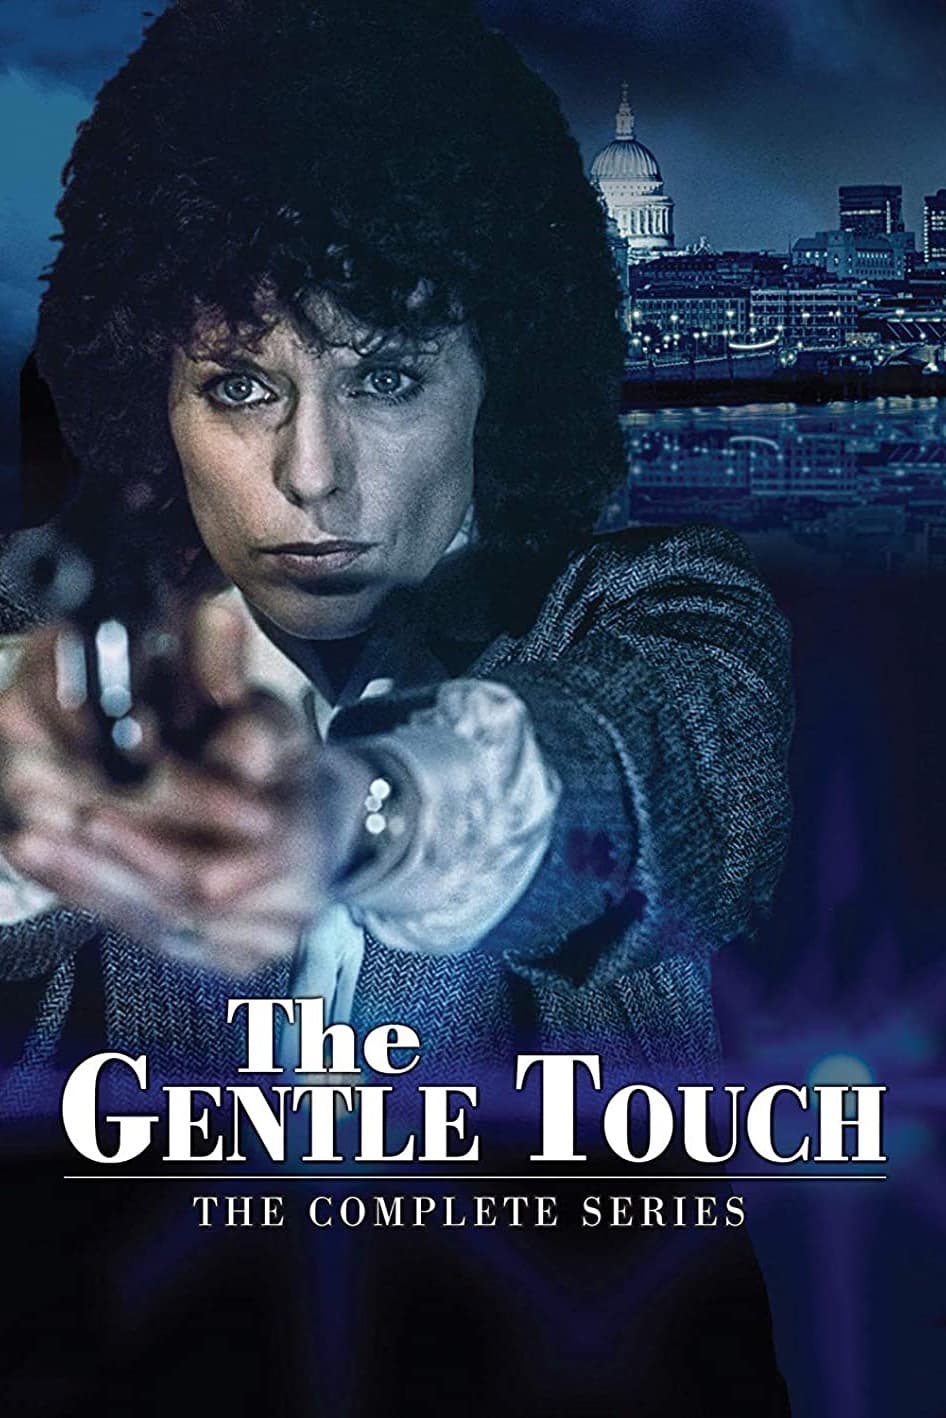 The Gentle Touch (1980)